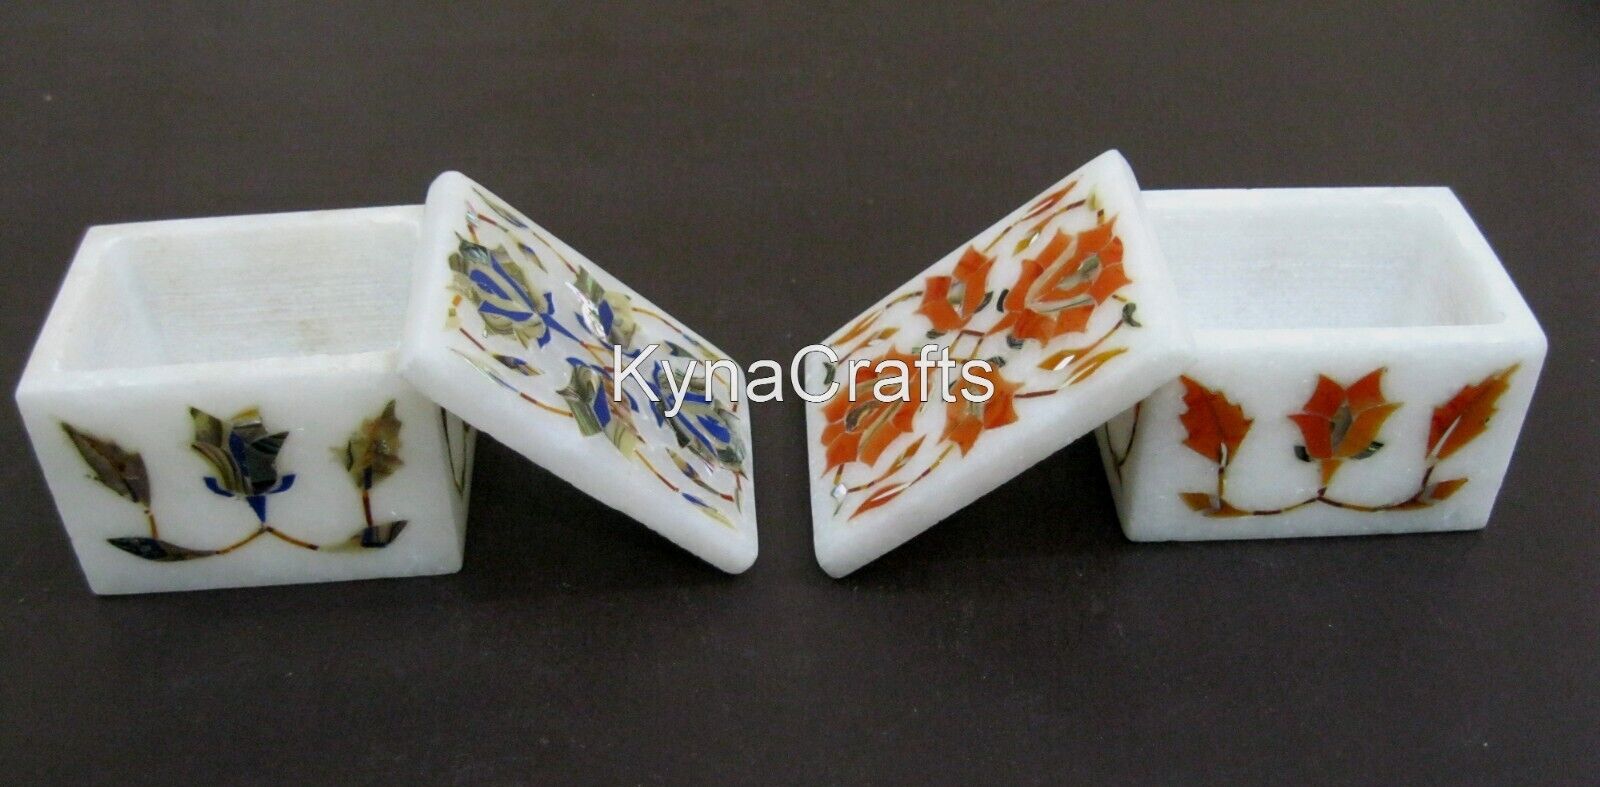 2.5x1.5 Inches Floral Design Inlaid Jewelry Box Marble Candy Box Set of 2 Pieces